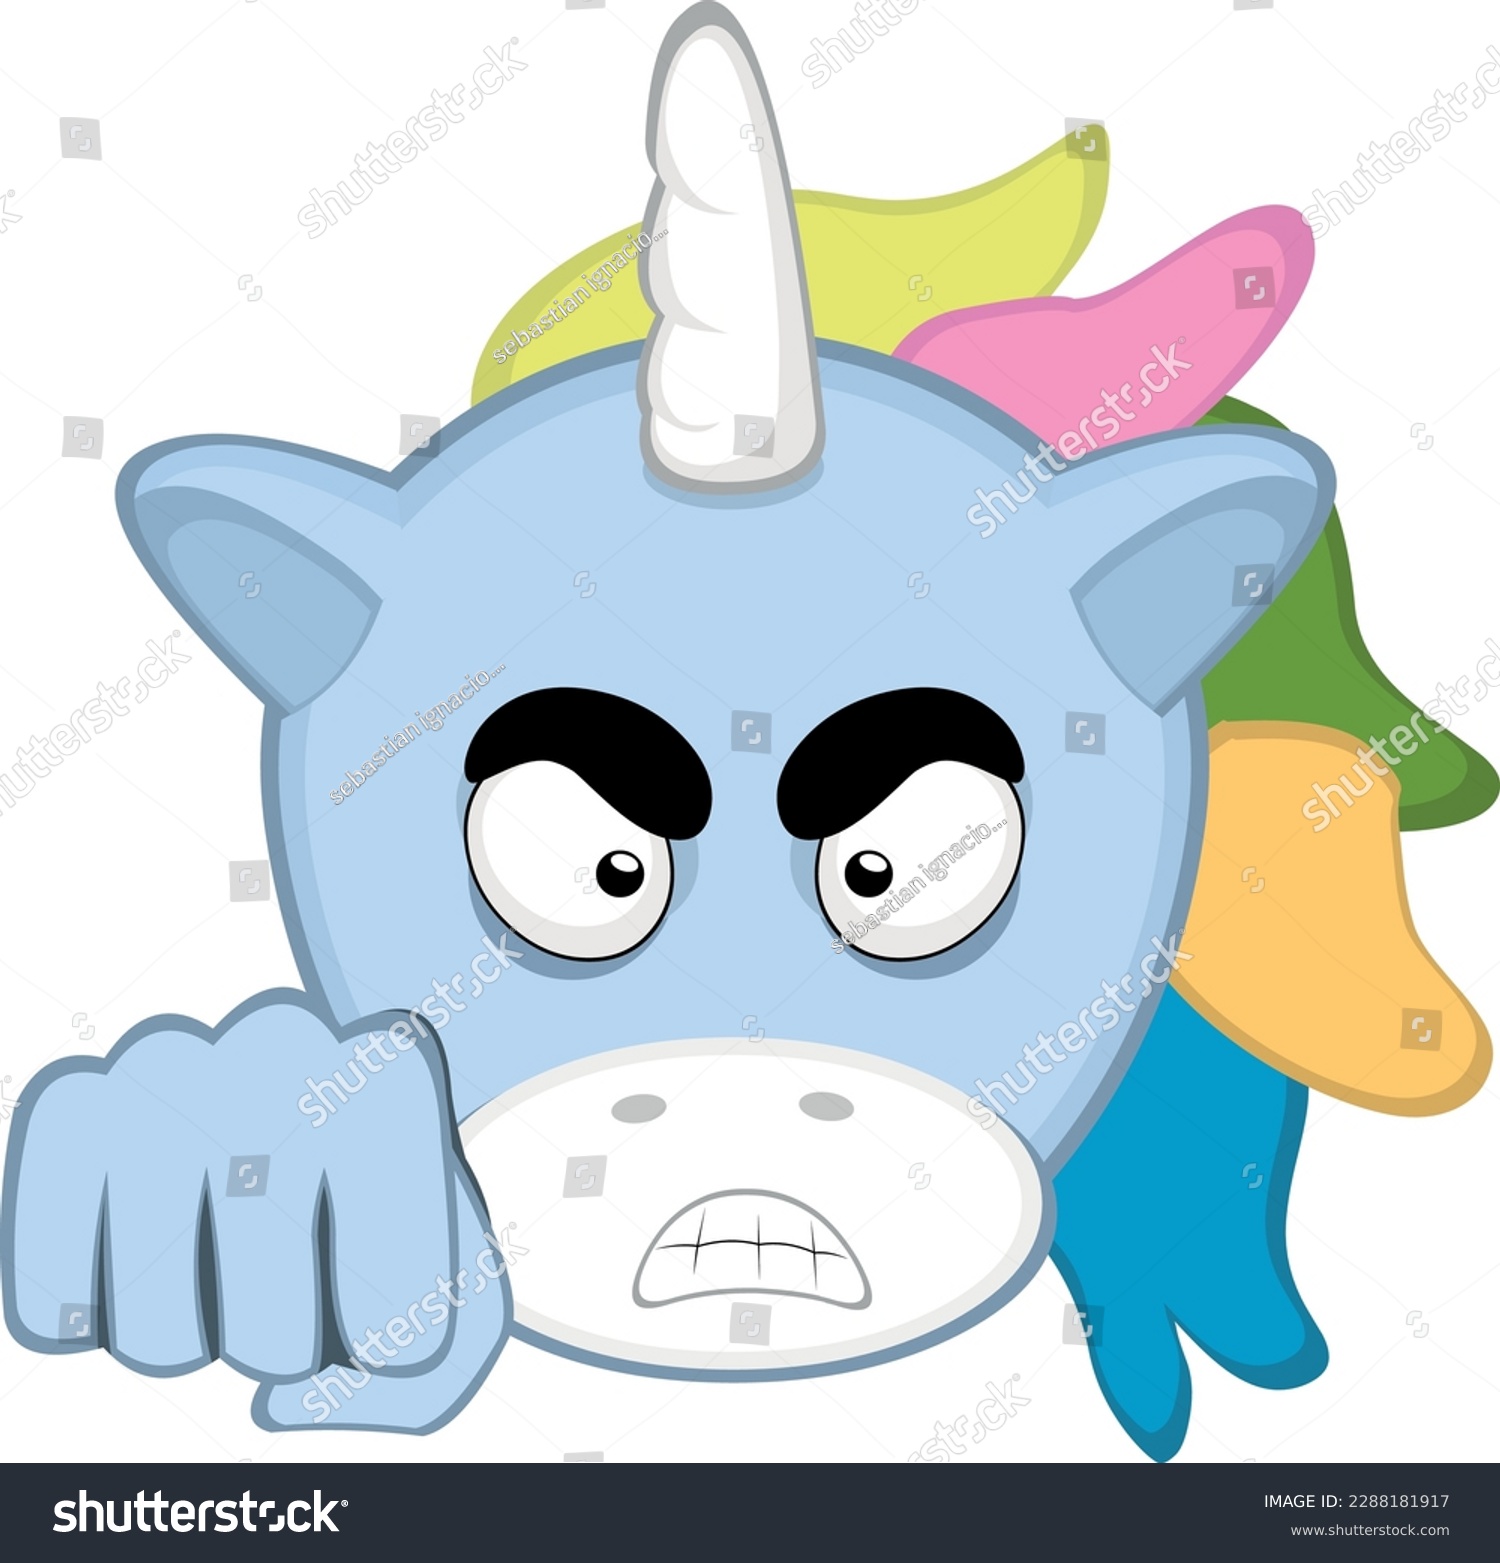 SVG of vector illustration face of an angry unicorn giving a fist bump svg